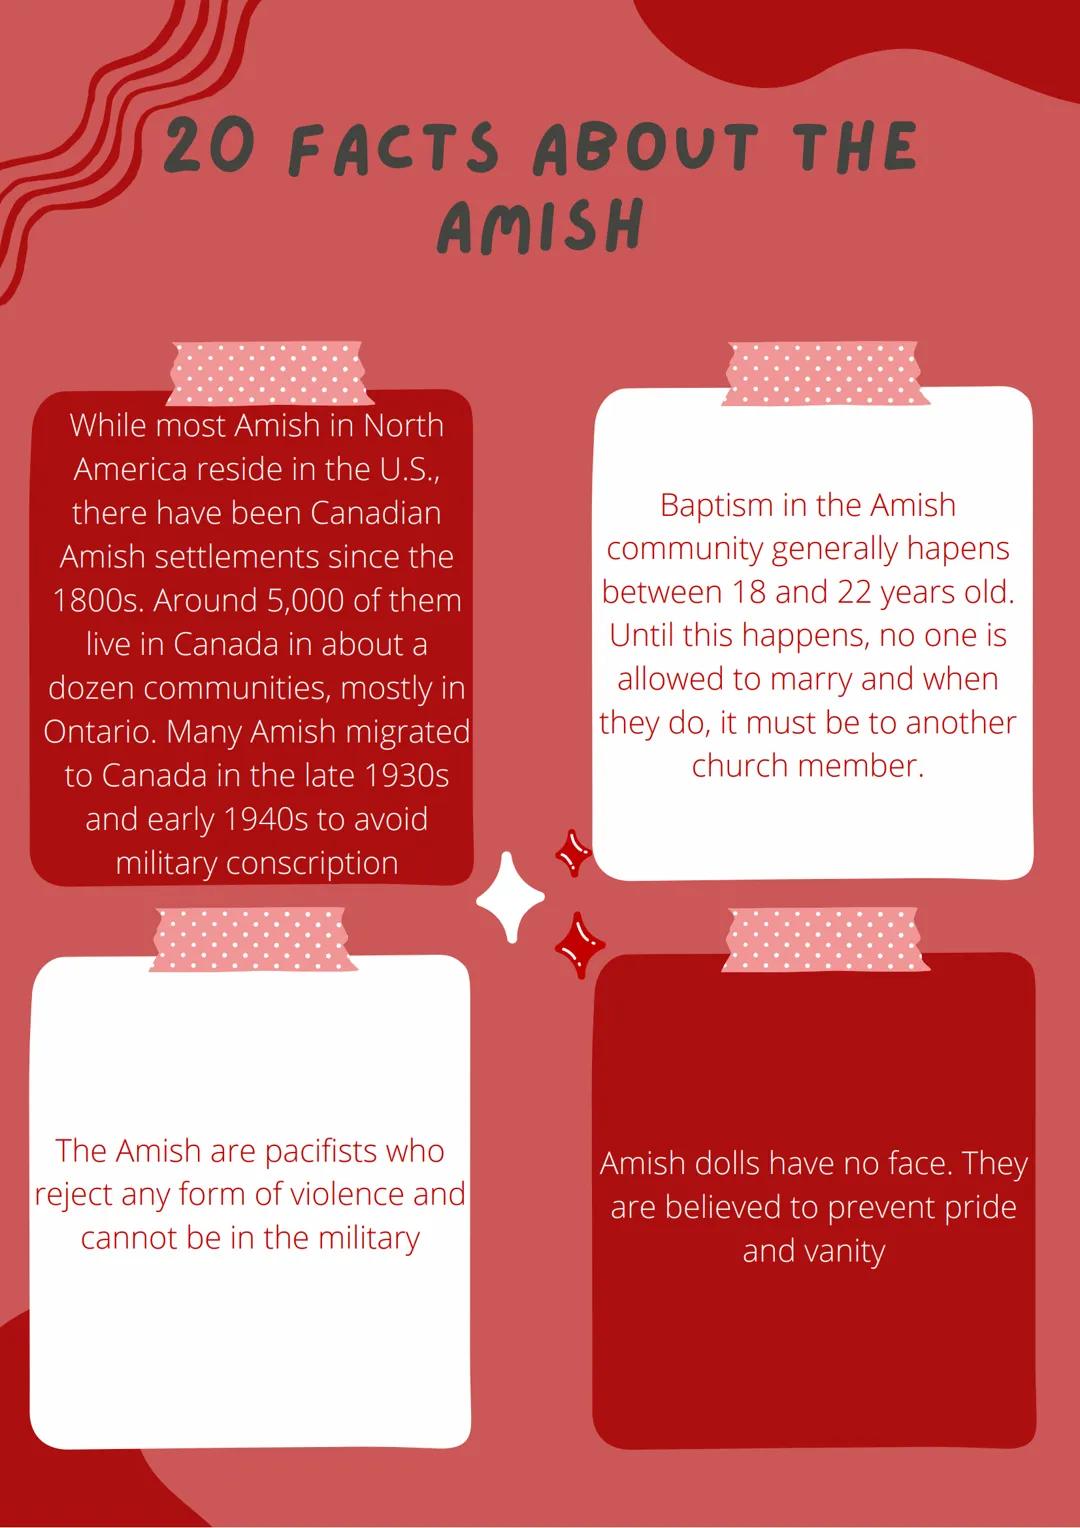 20 FACTS ABOUT THE
AMISH
While most Amish in North
America reside in the U.S.,
there have been Canadian
Amish settlements since the
1800s. A